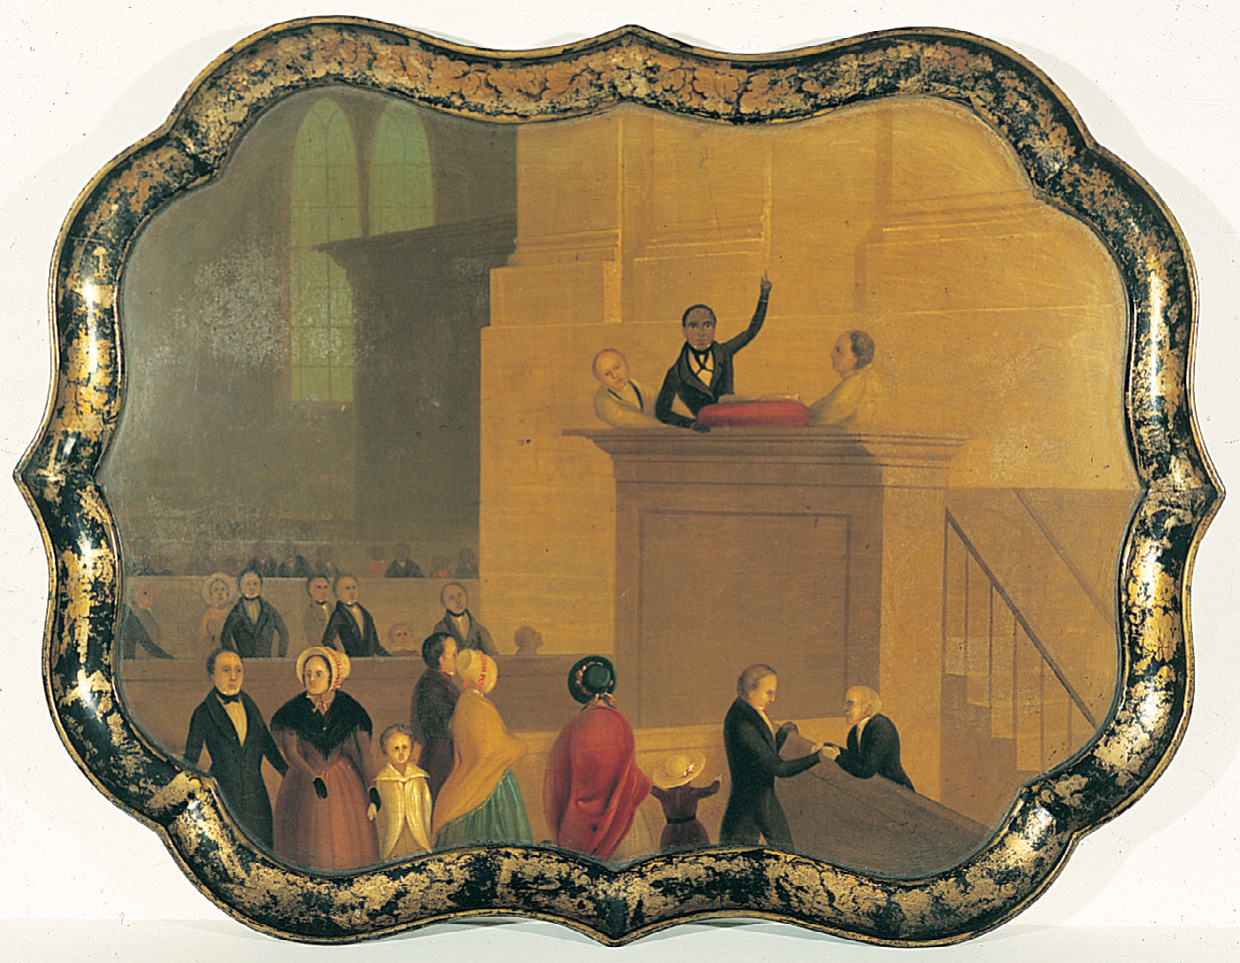 A painting on a tray shows an African-American man speaking
in a church.